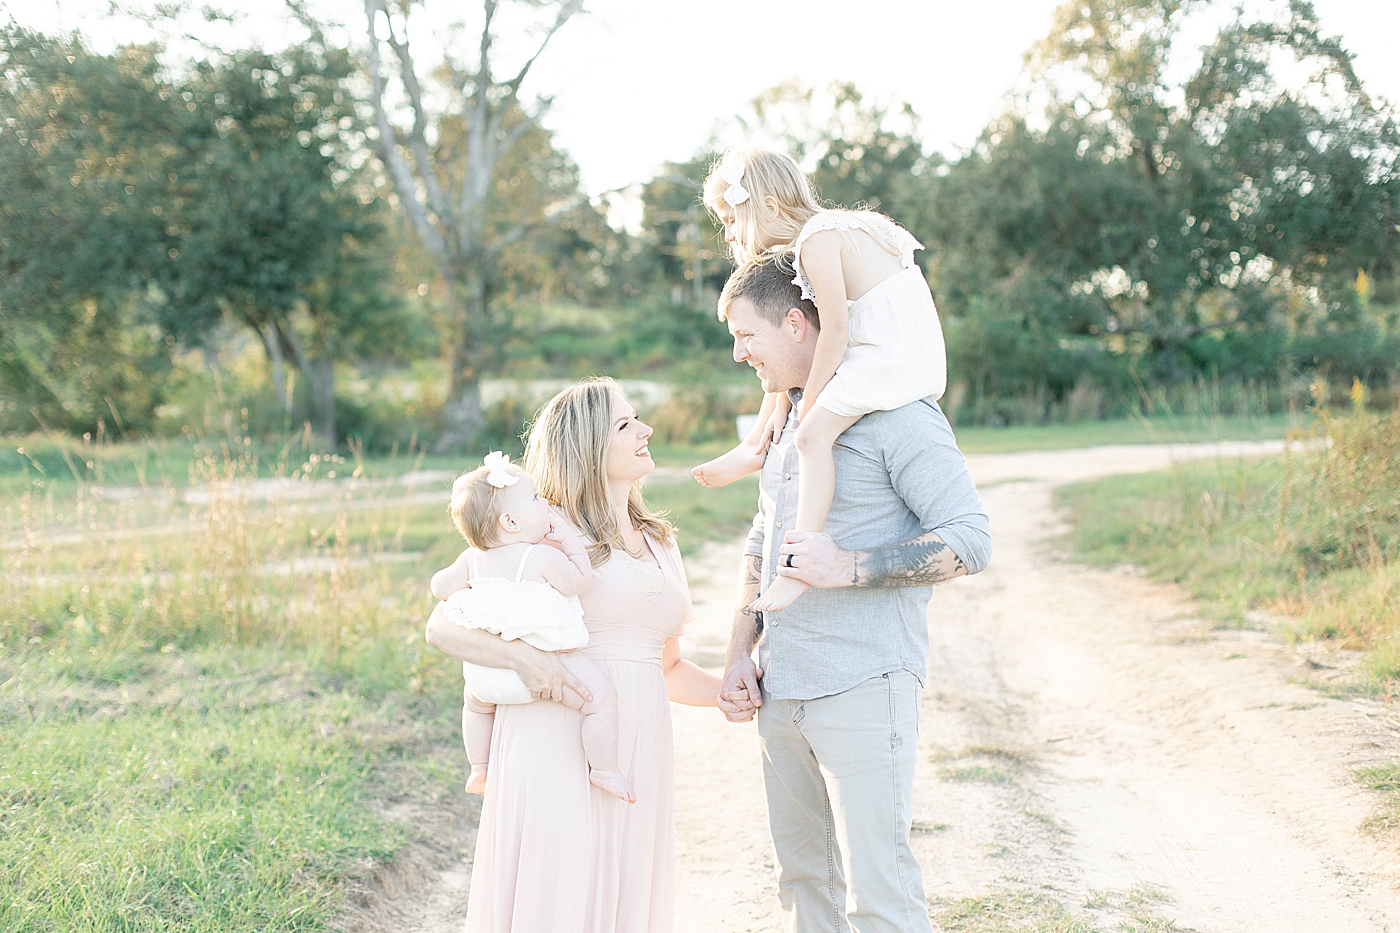 Family walking together on a dirt path | Photo by Little Sunshine Photography